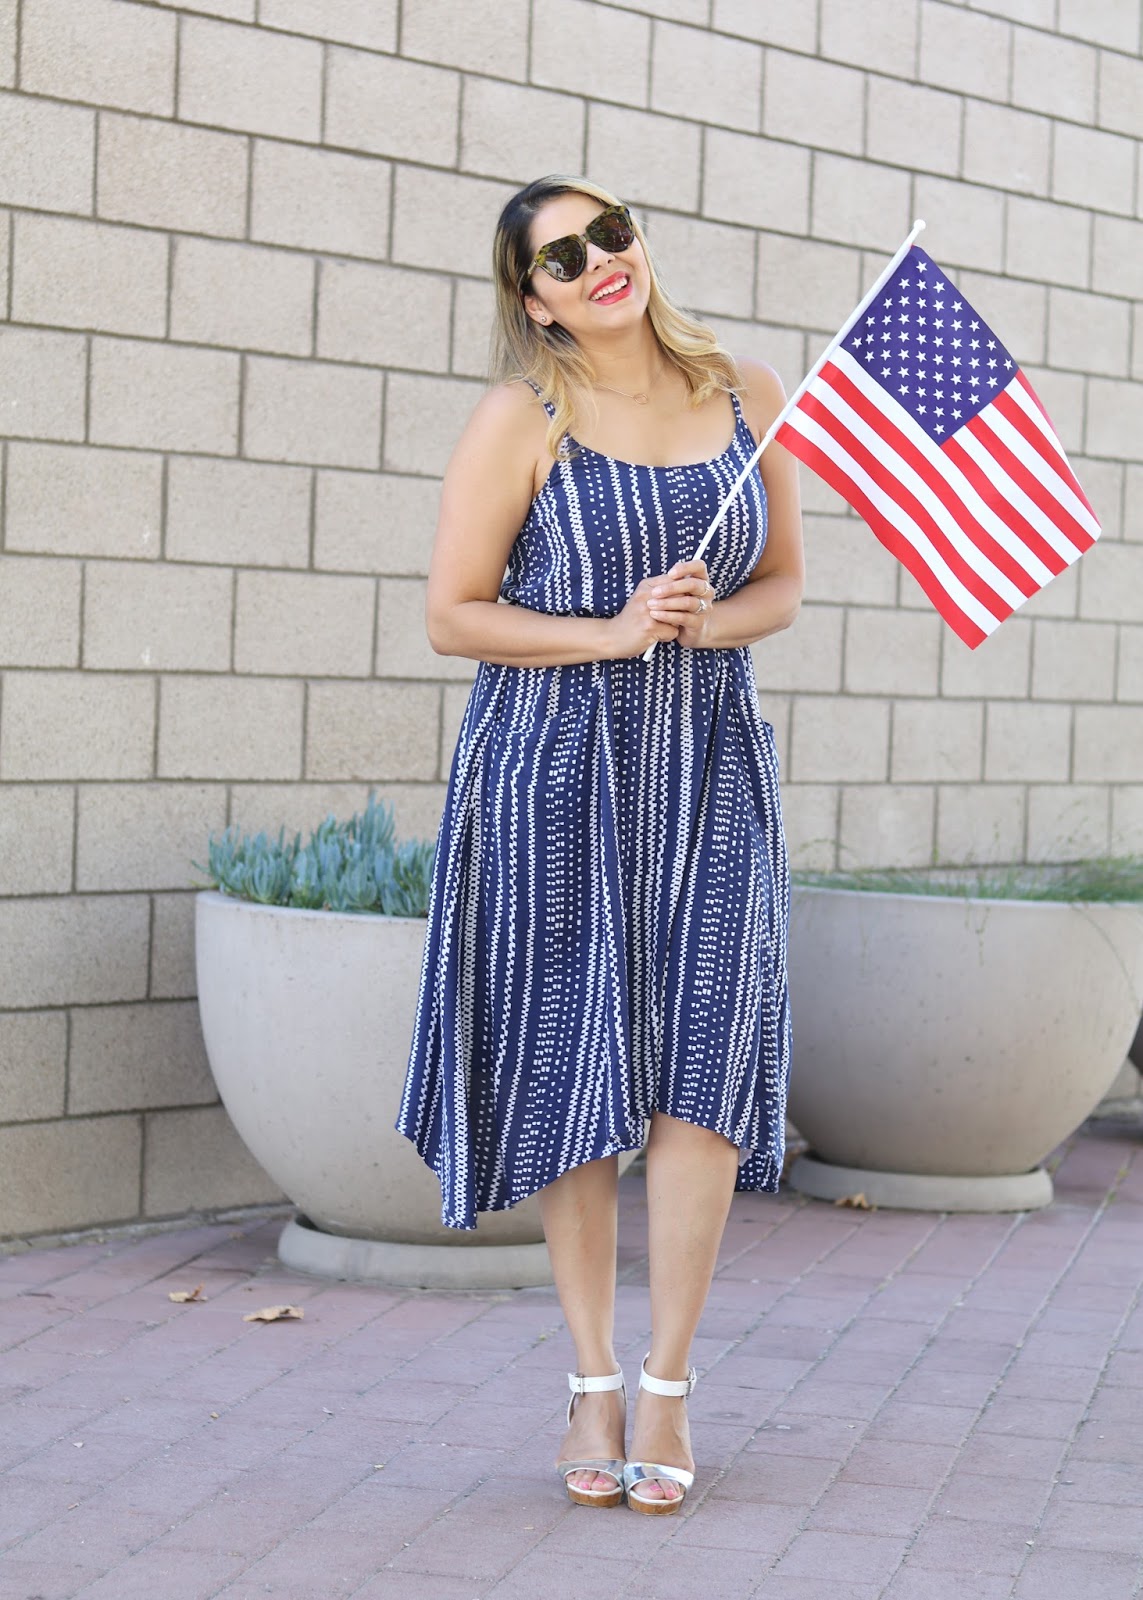 Patriotic Looks for 4th of July Outfits